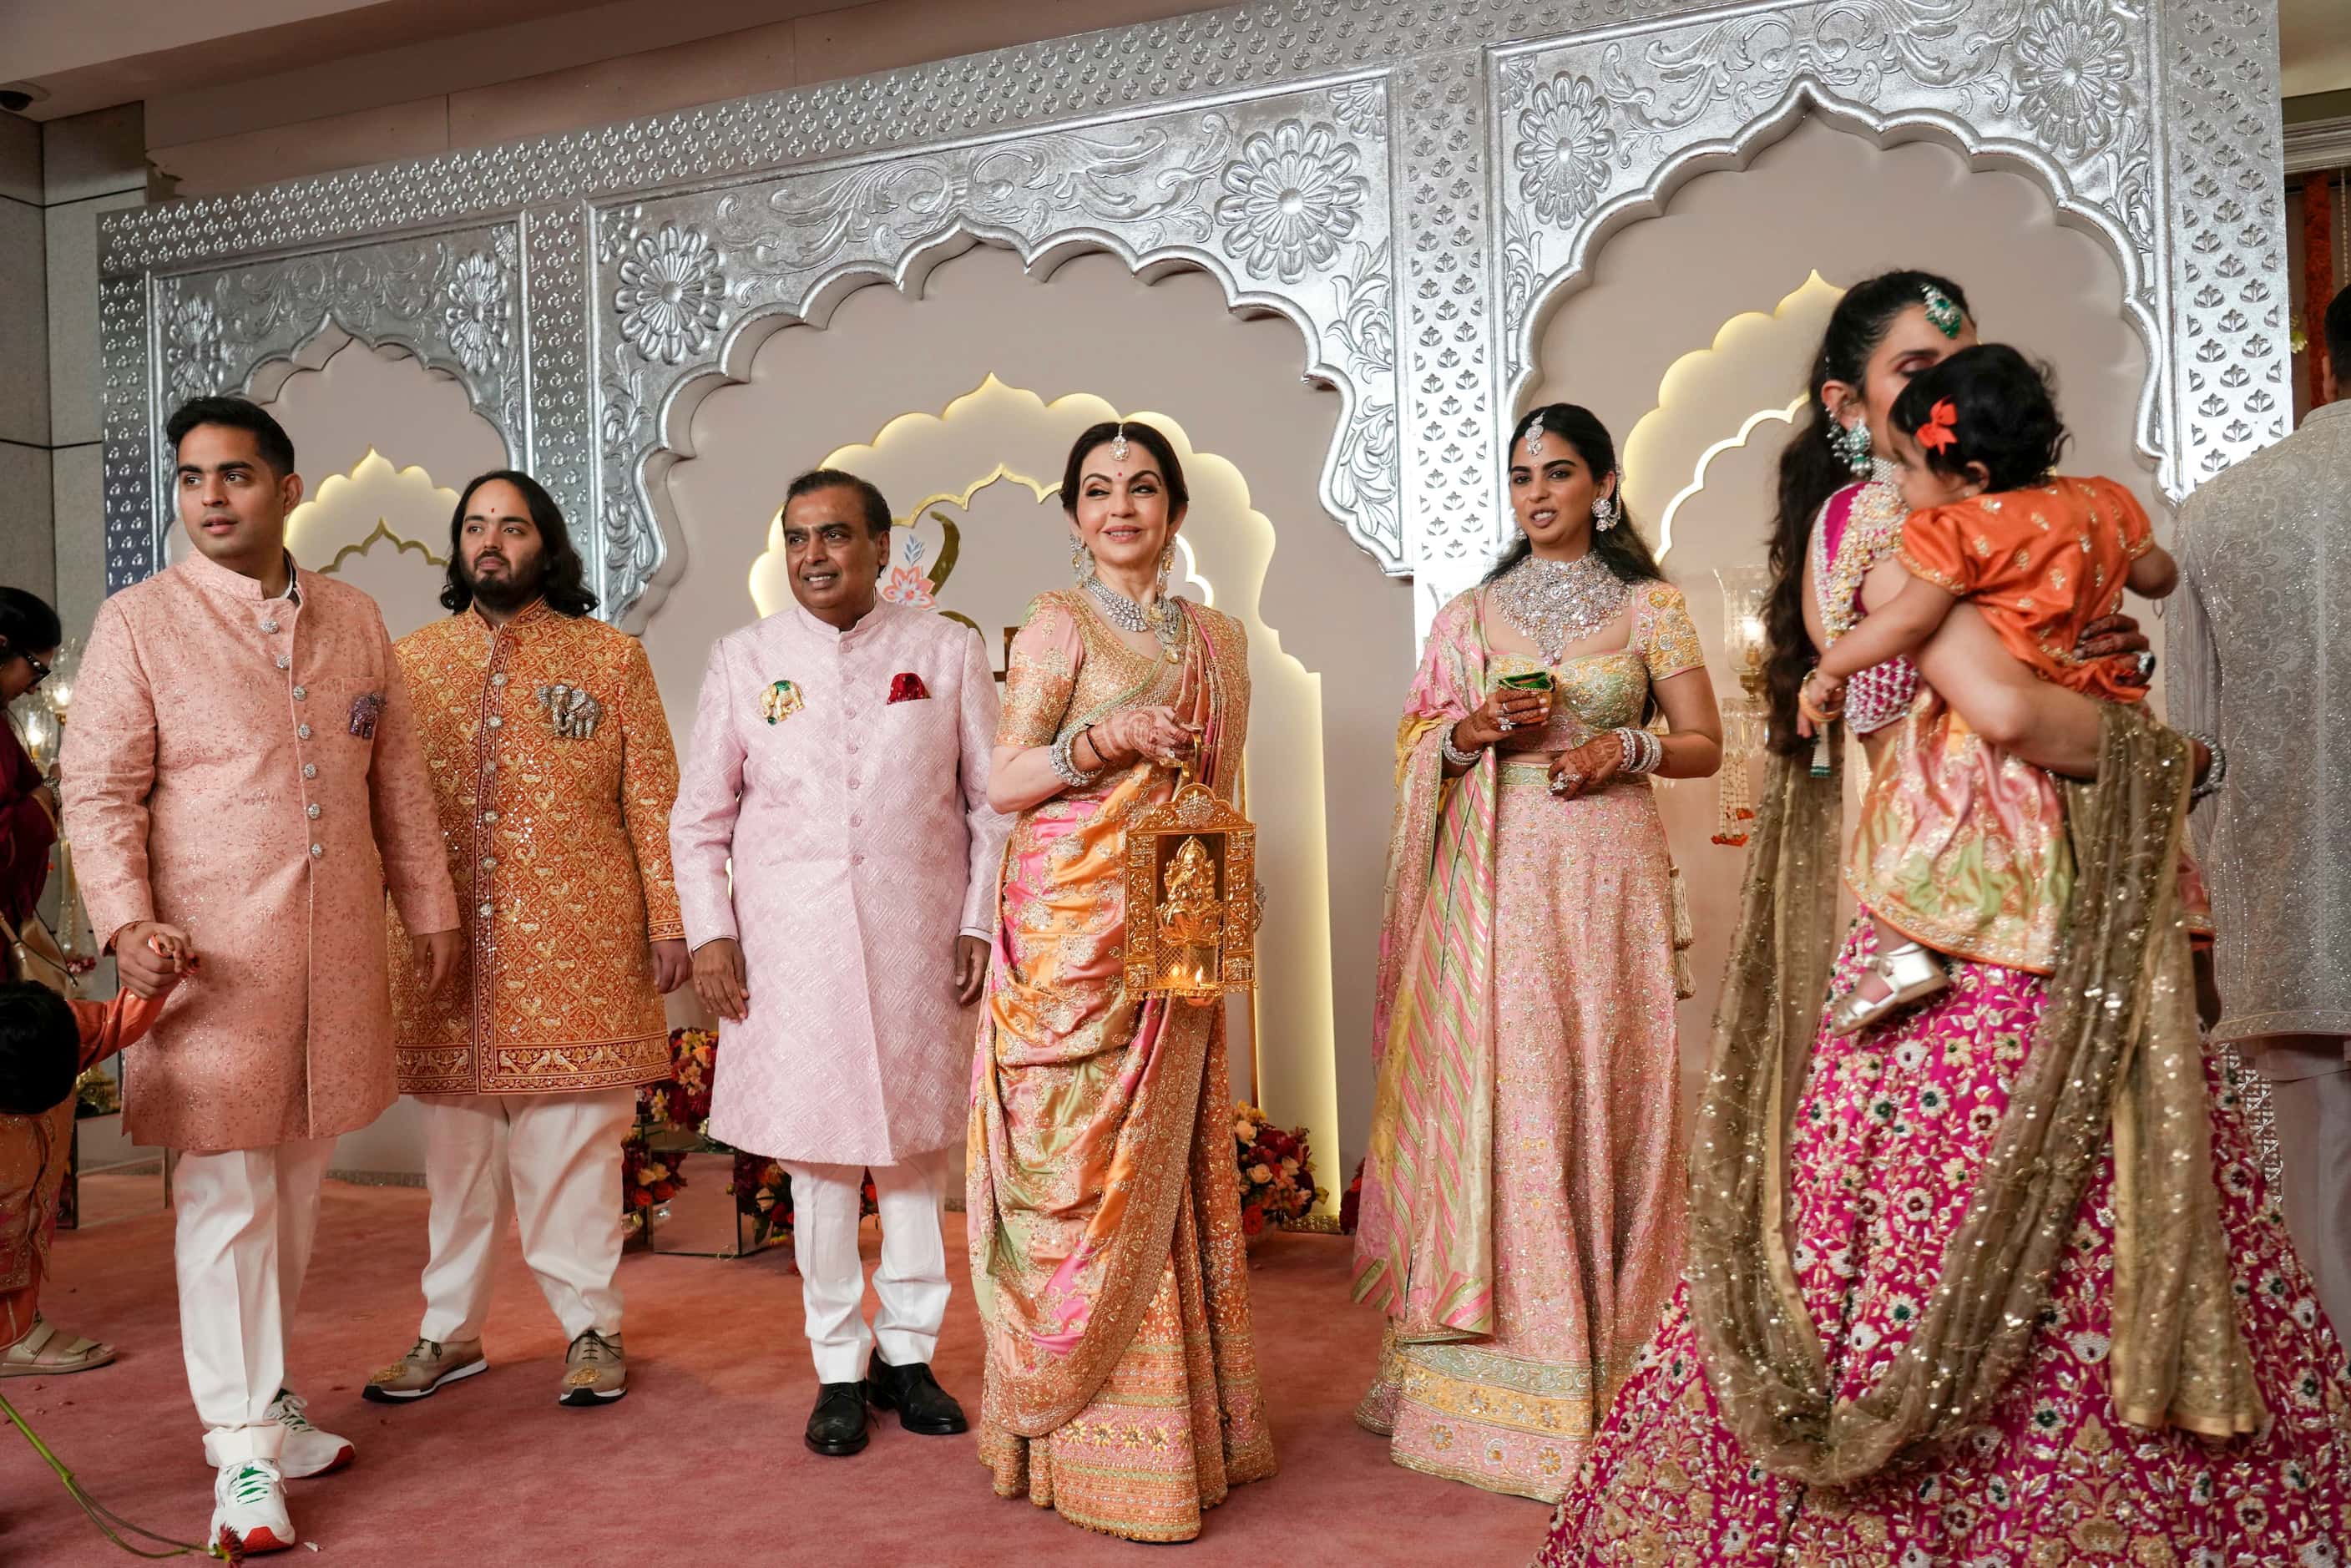 Billionaire Mukesh Ambani, third left, stands with his family members from left to right,...